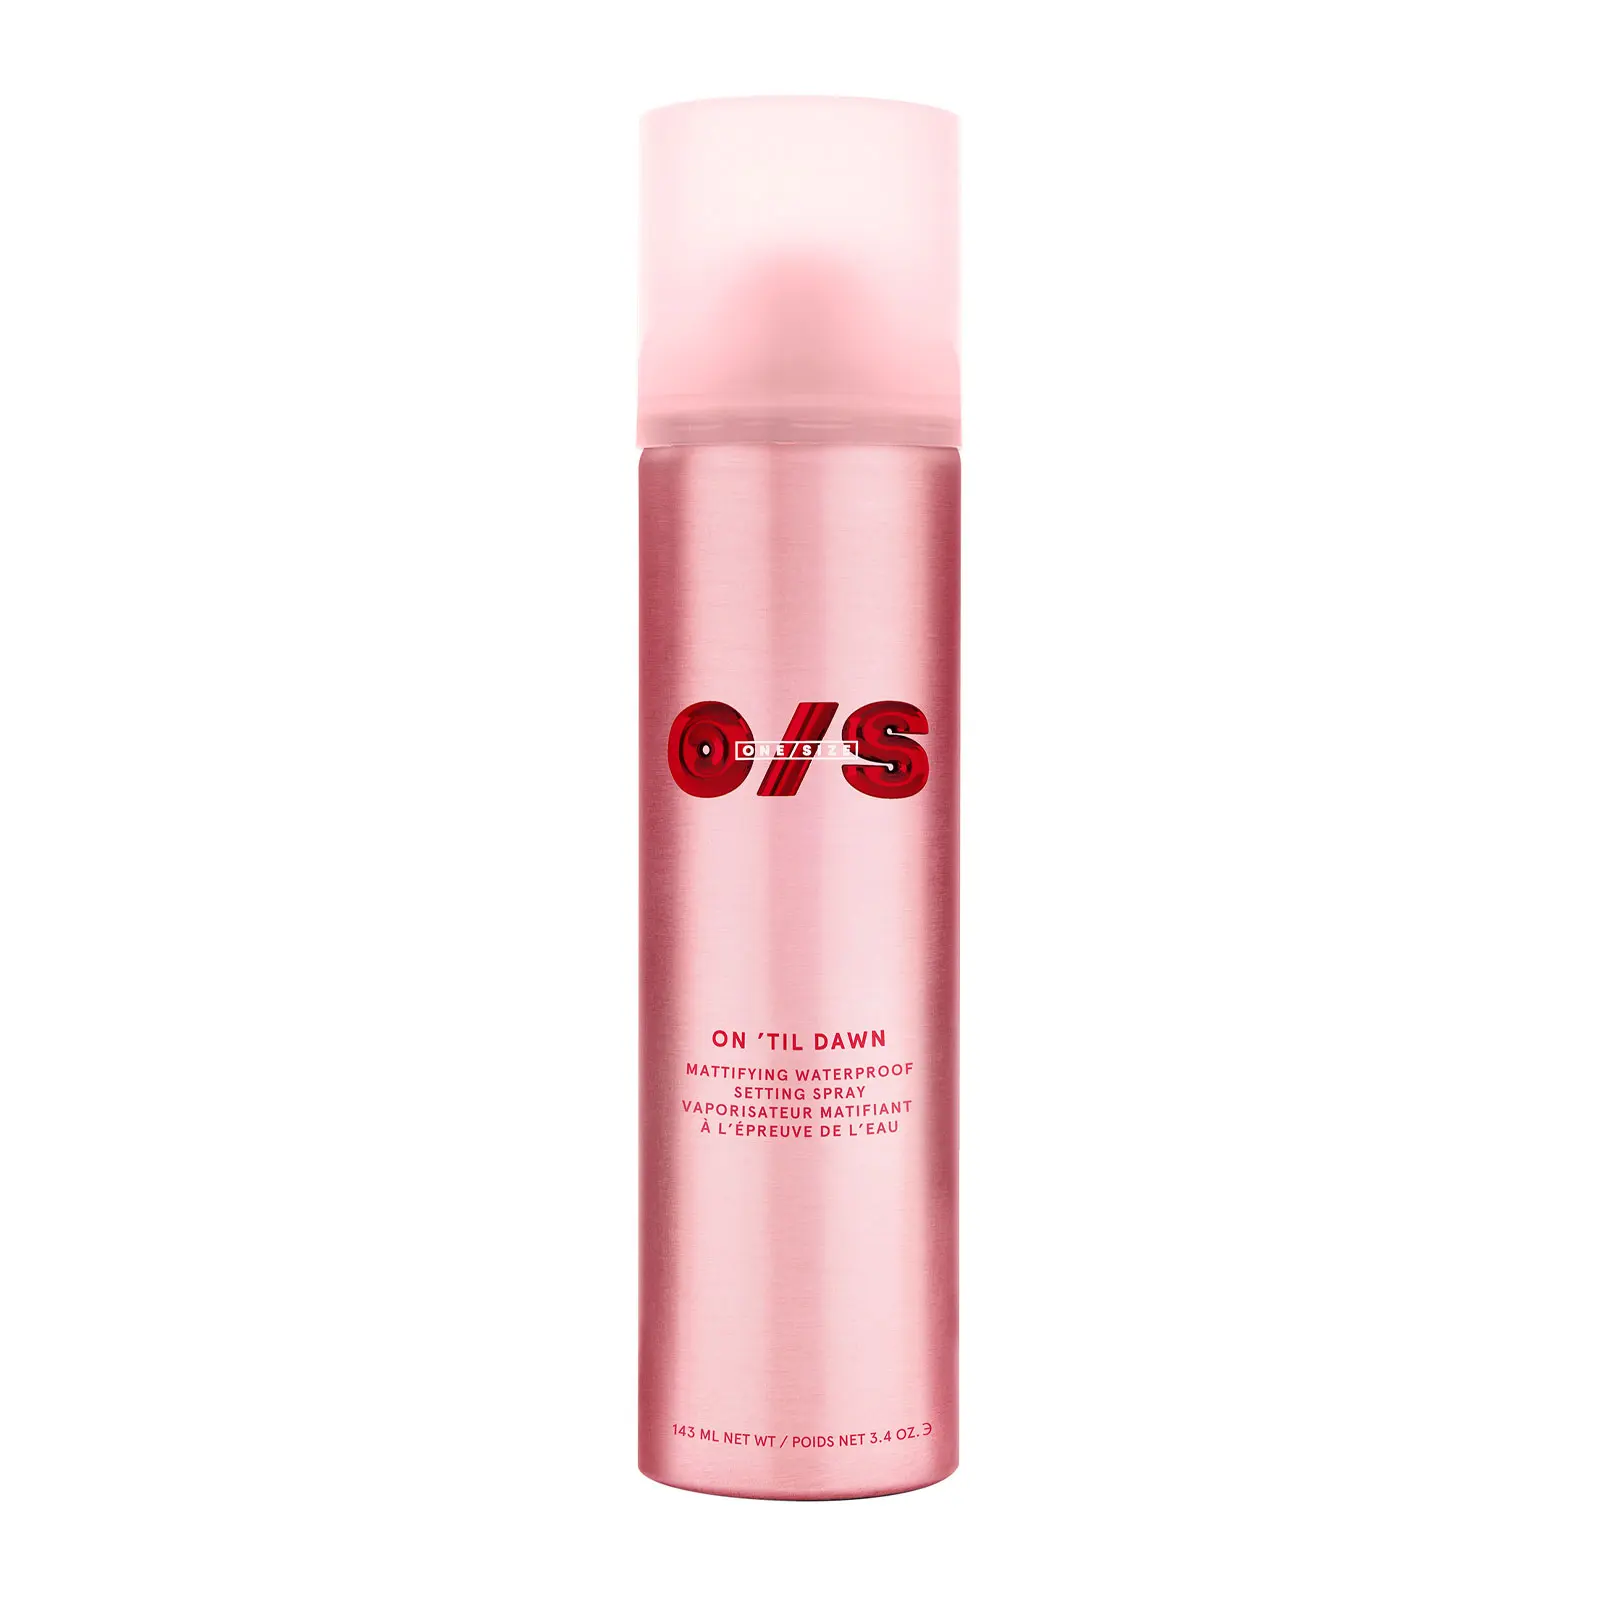 ONE/SIZE On 'Til Dawn Mattifying Waterproof Setting Spray 143ml Discounts and Cashback